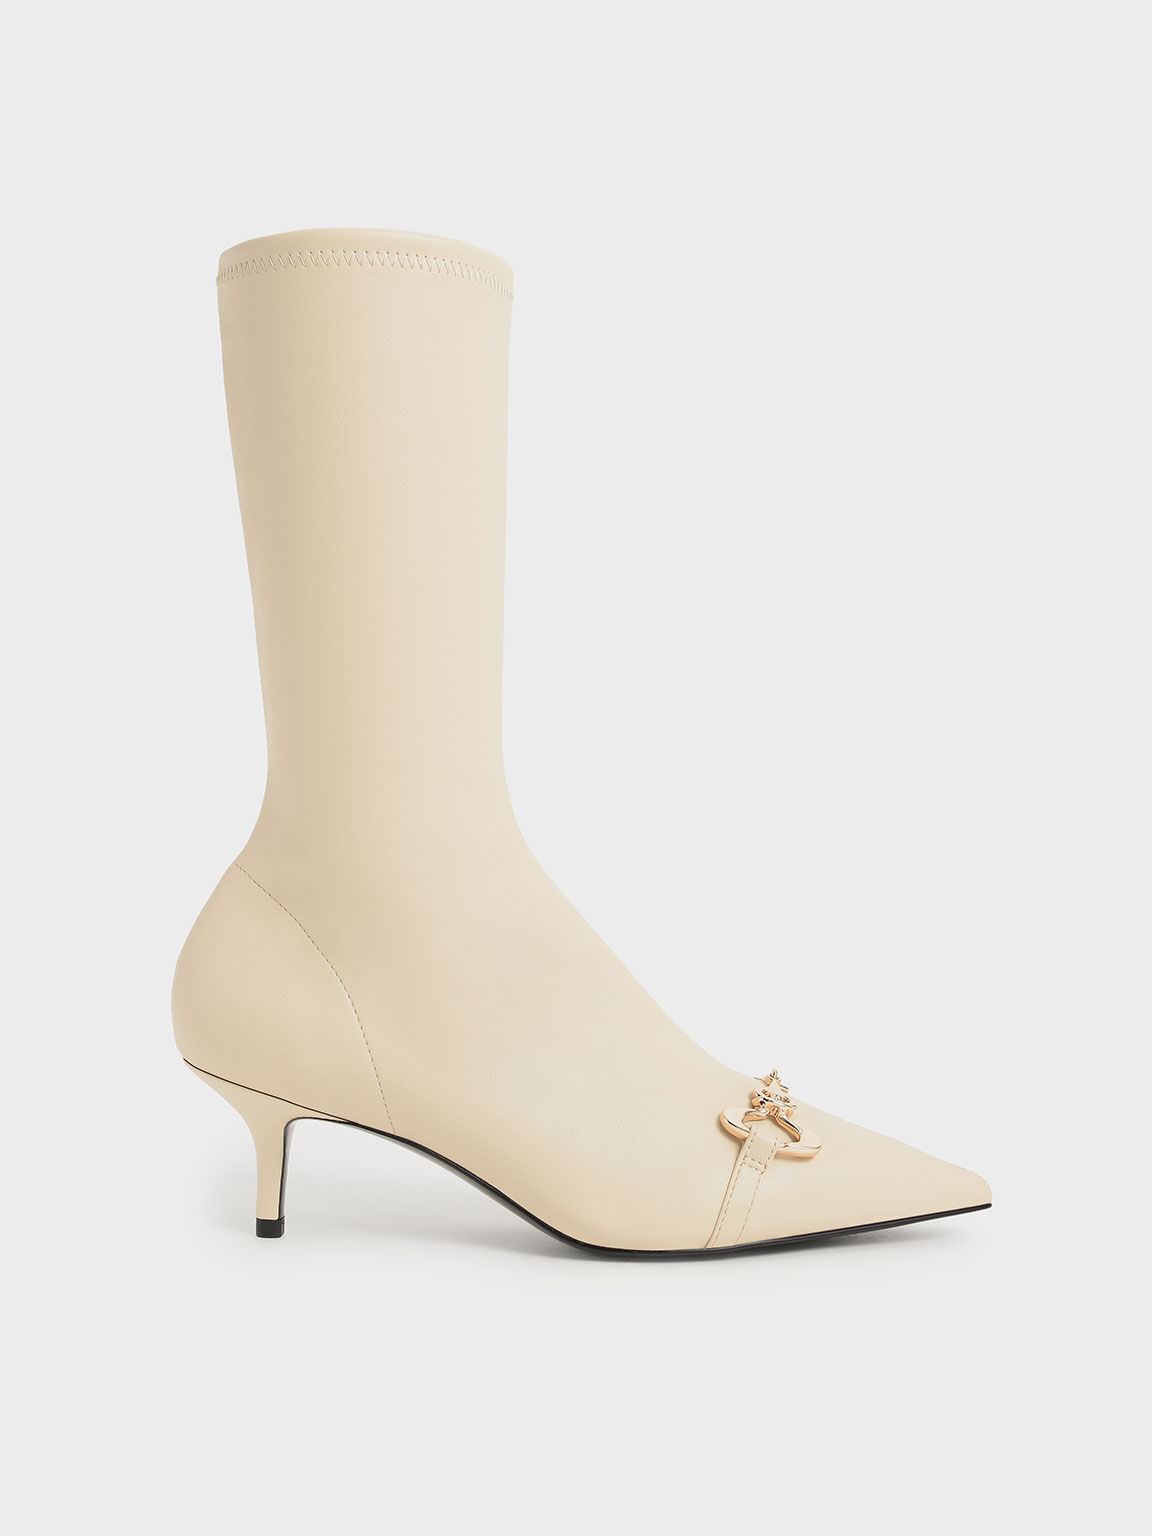 Elery Slip-On Ankle Boots, Sand, hi-res